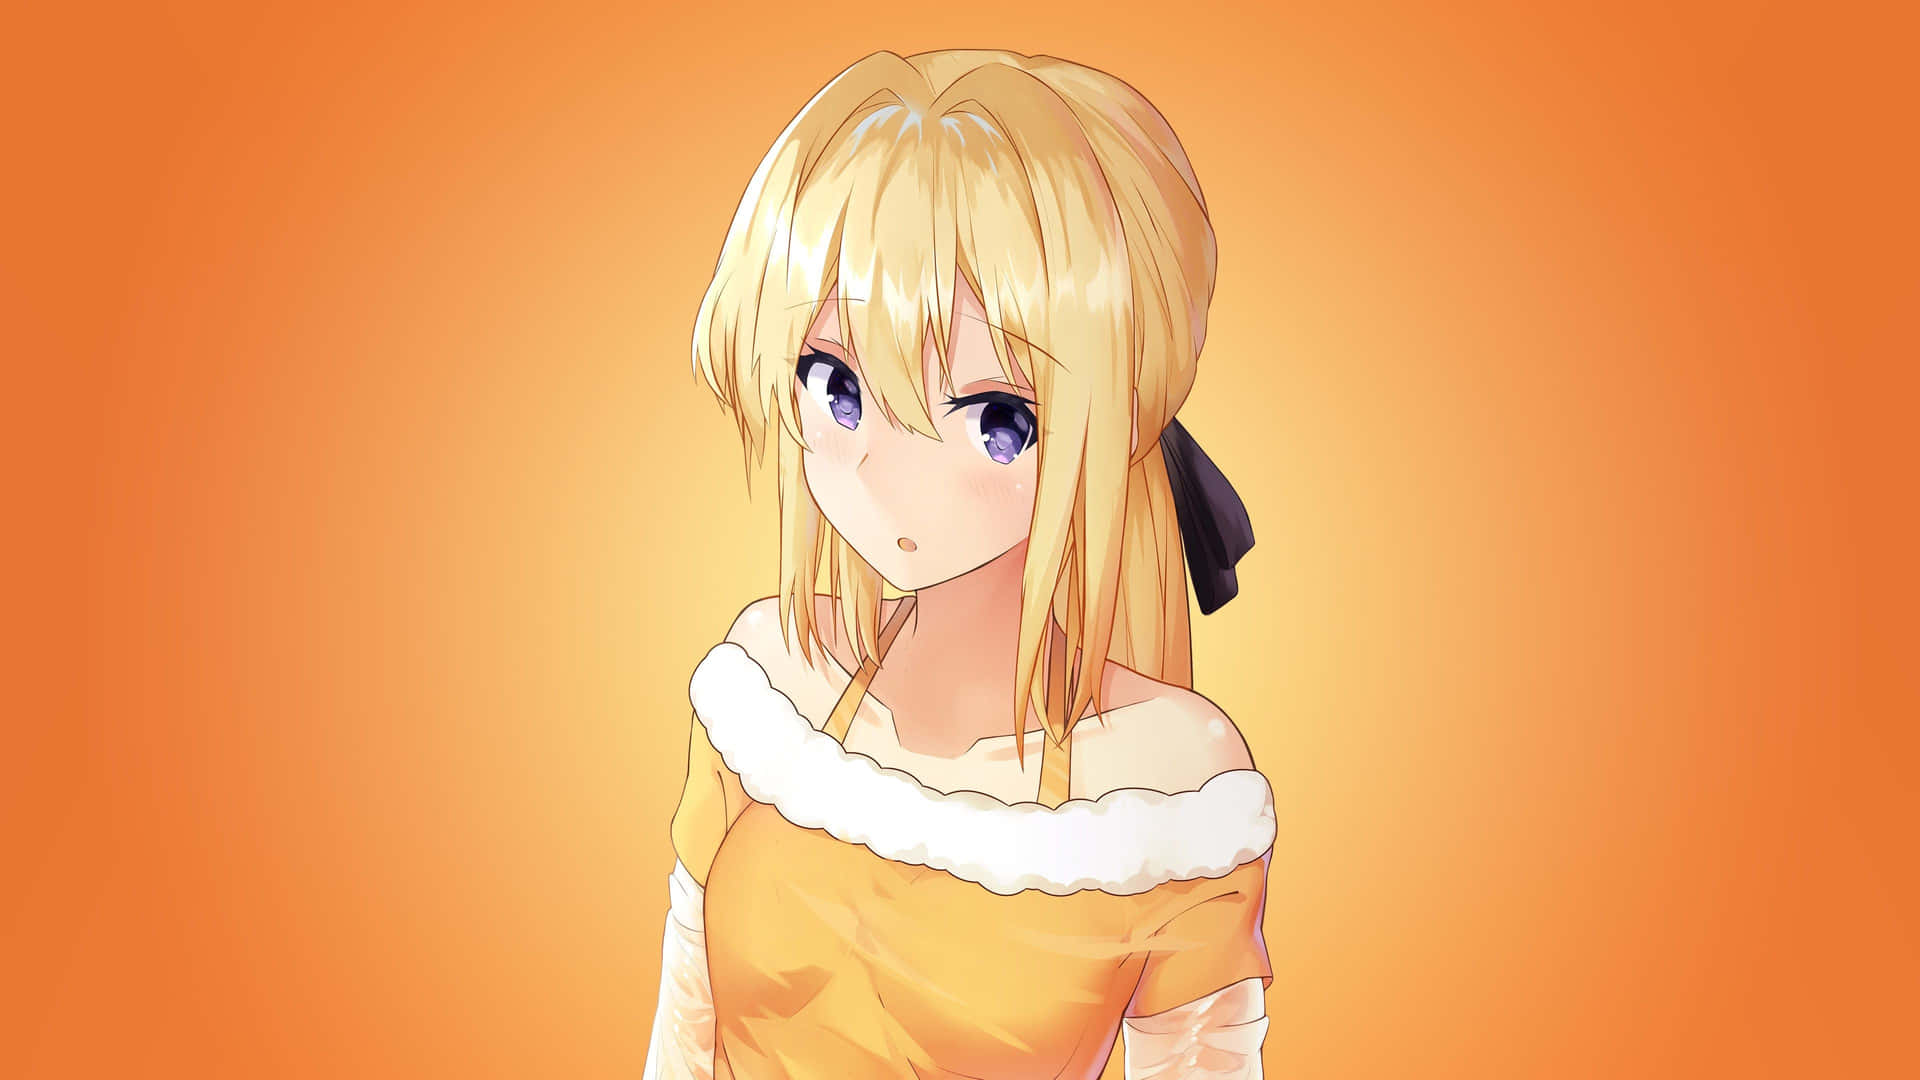 Yellow Anime Saber Fate/Stay Night Wallpaper